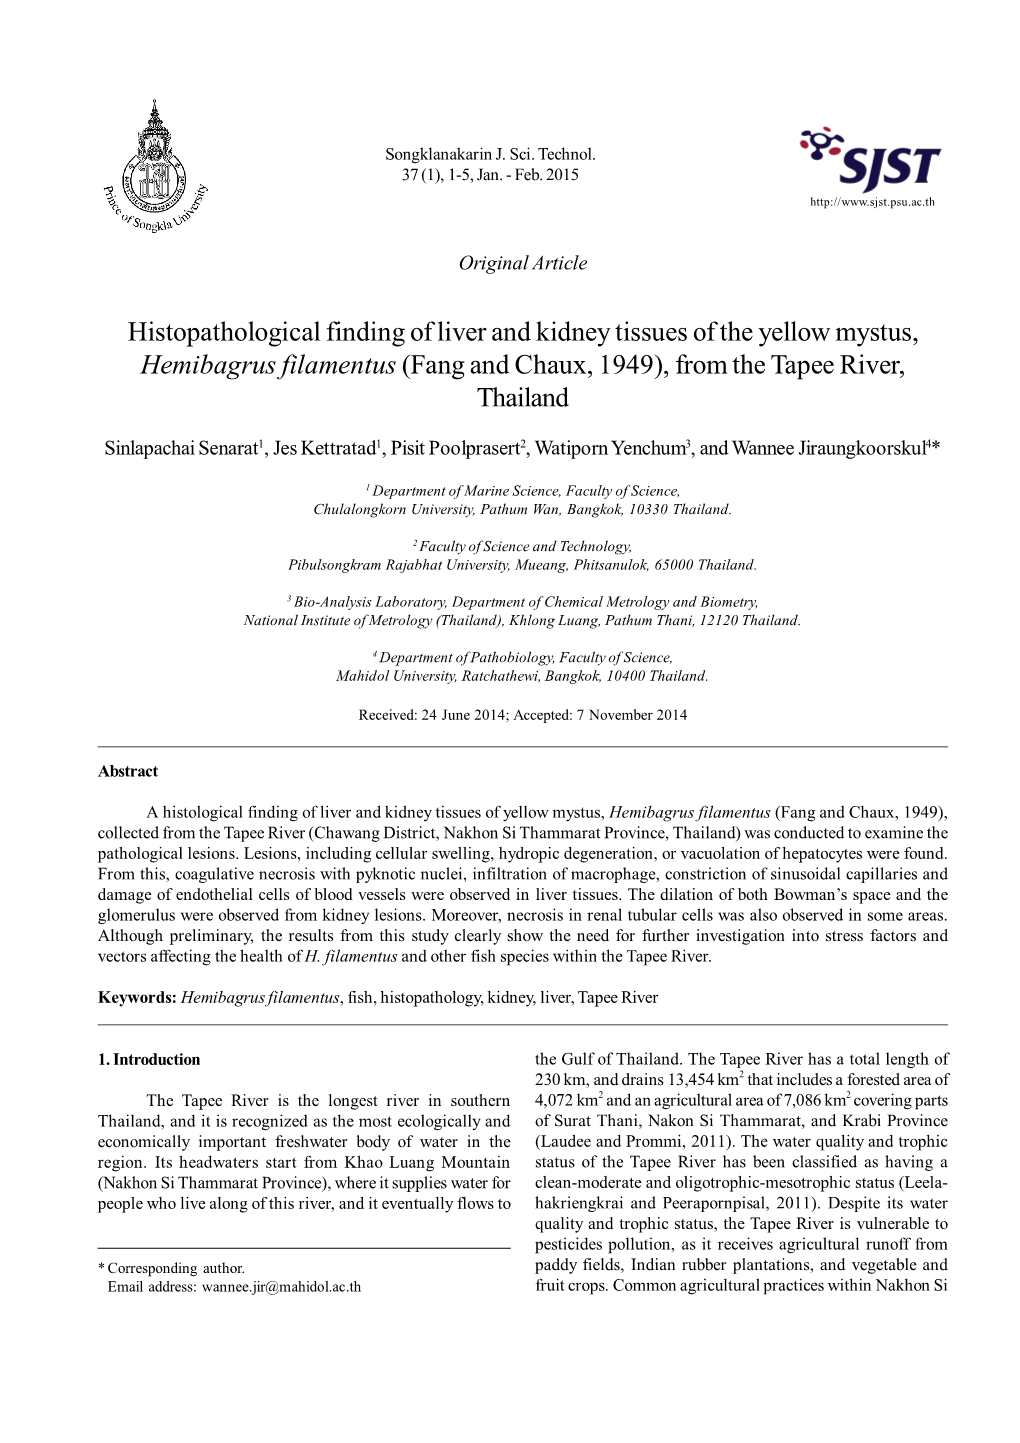 Histopathological Finding of Liver and Kidney Tissues of the Yellow Mystus, Hemibagrus Filamentus (Fang and Chaux, 1949), from the Tapee River, Thailand